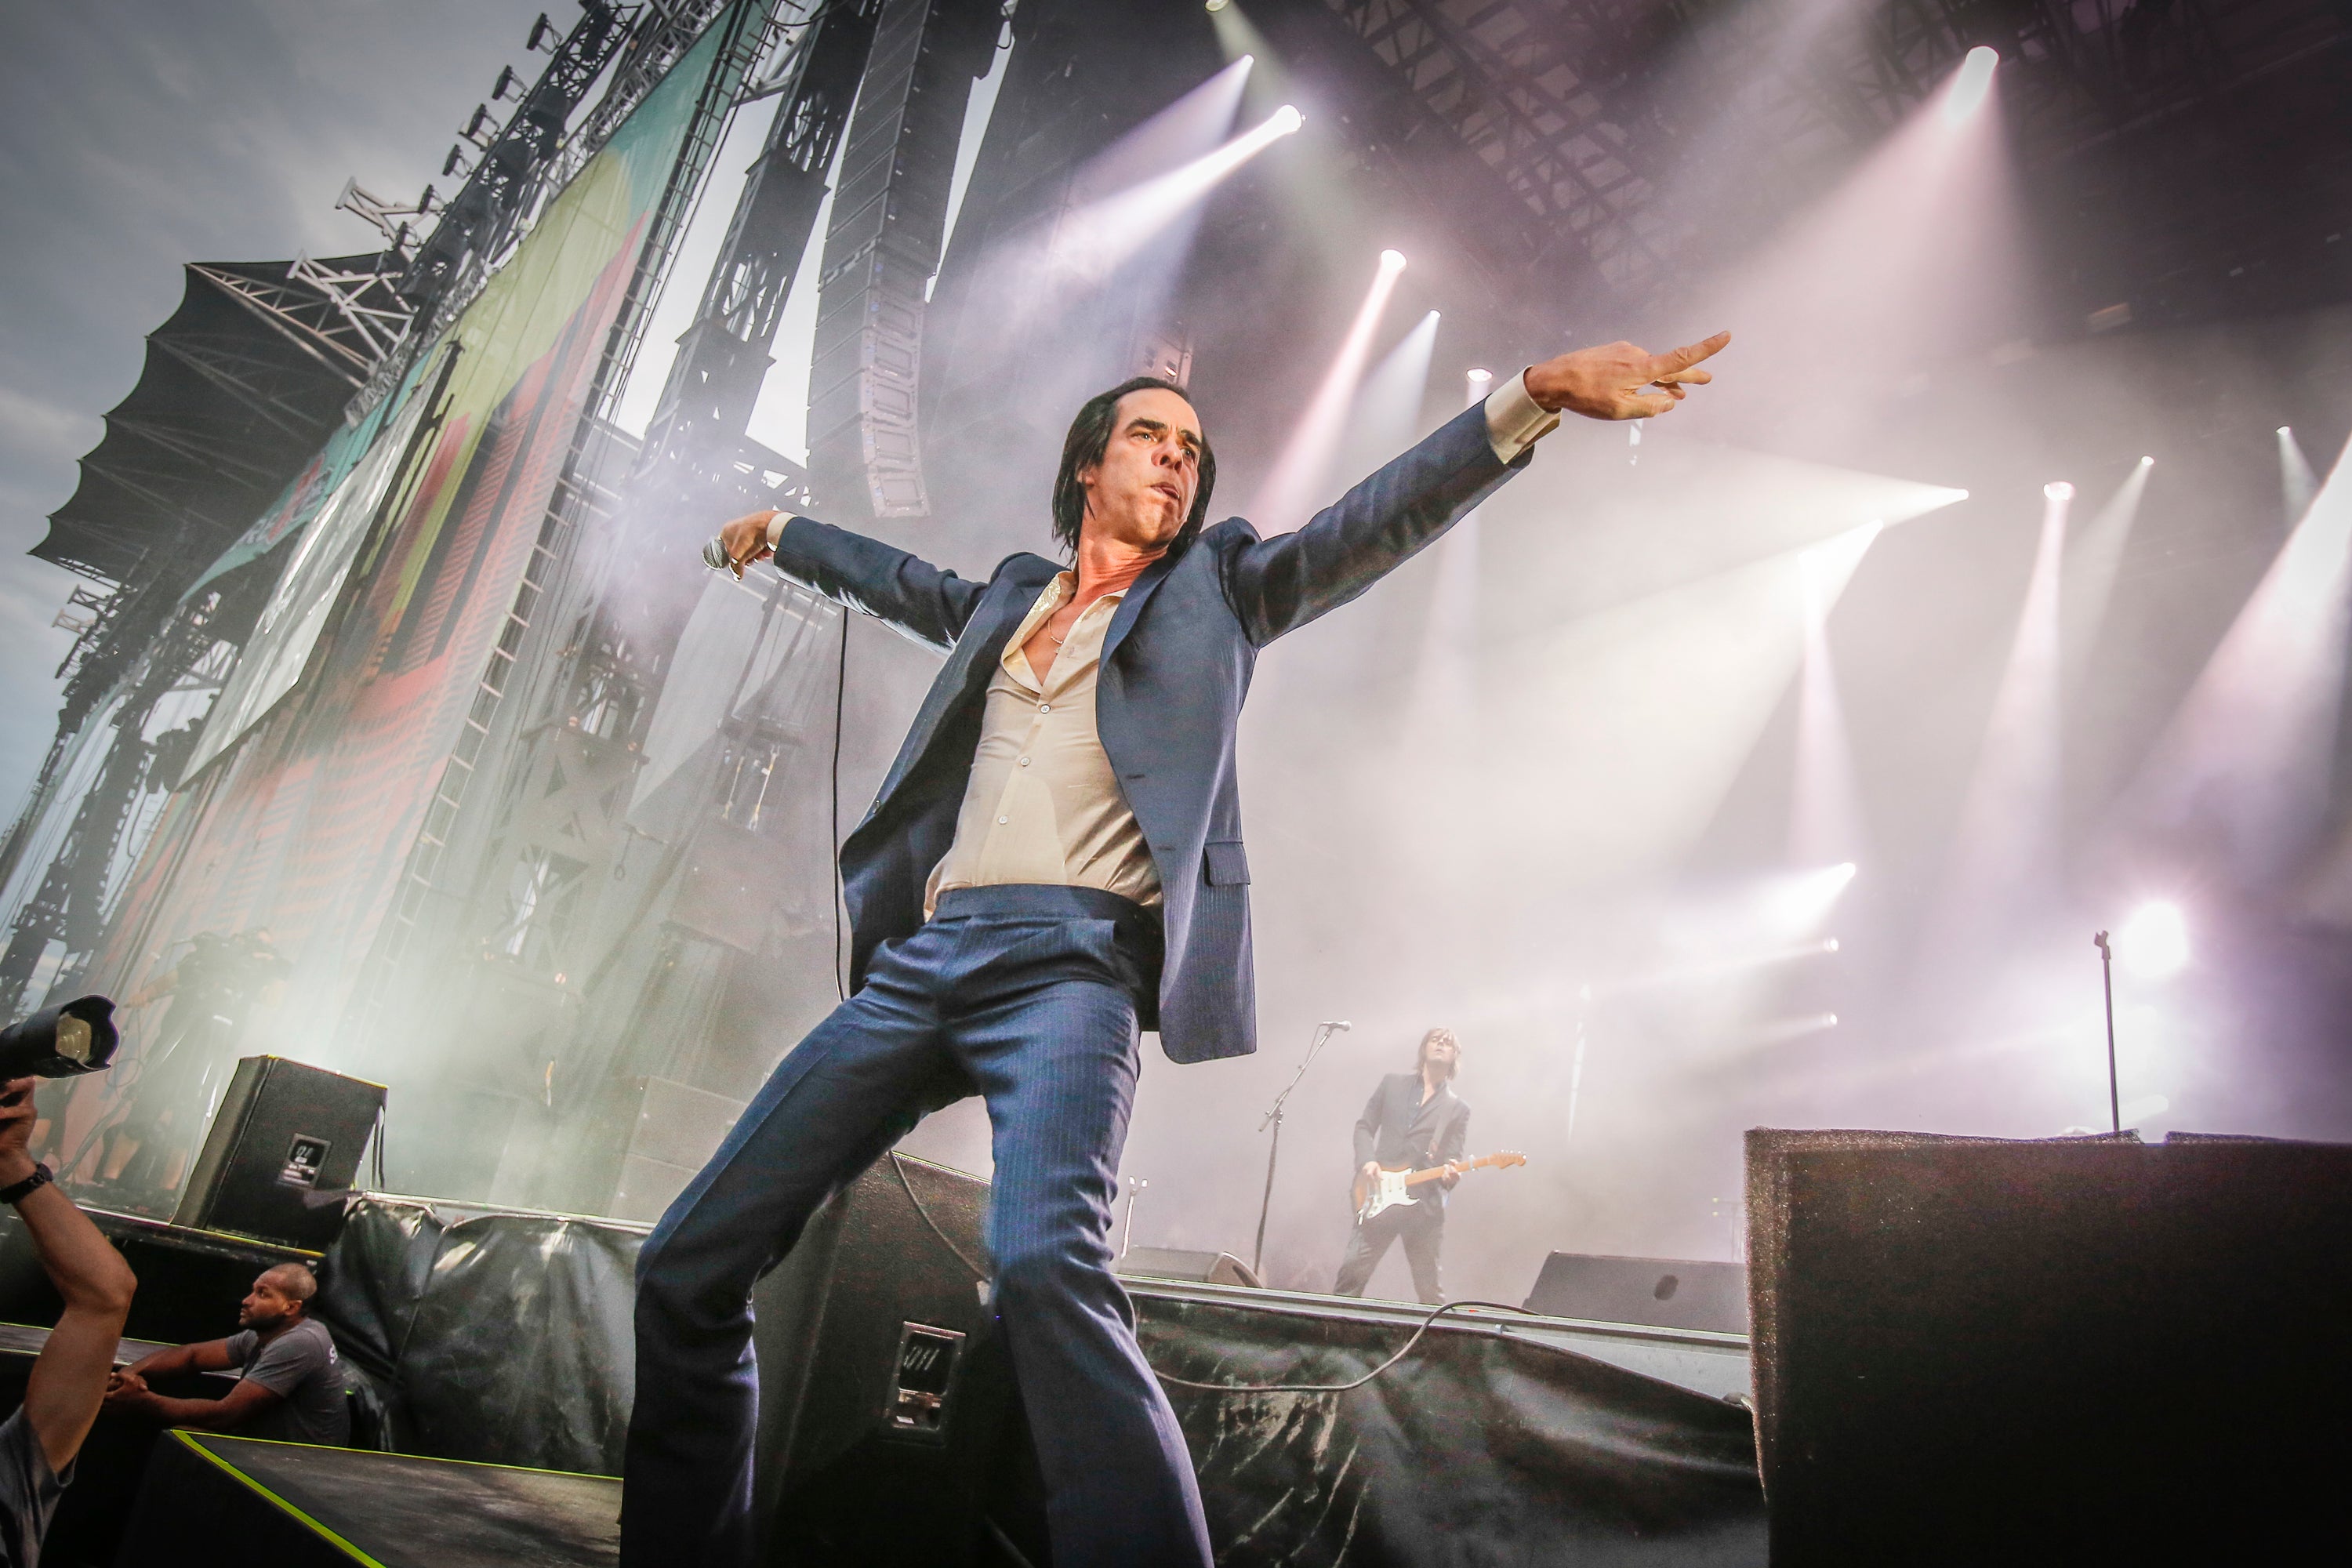 Nick Cave's son died after falling from a cliff in Brighton last July